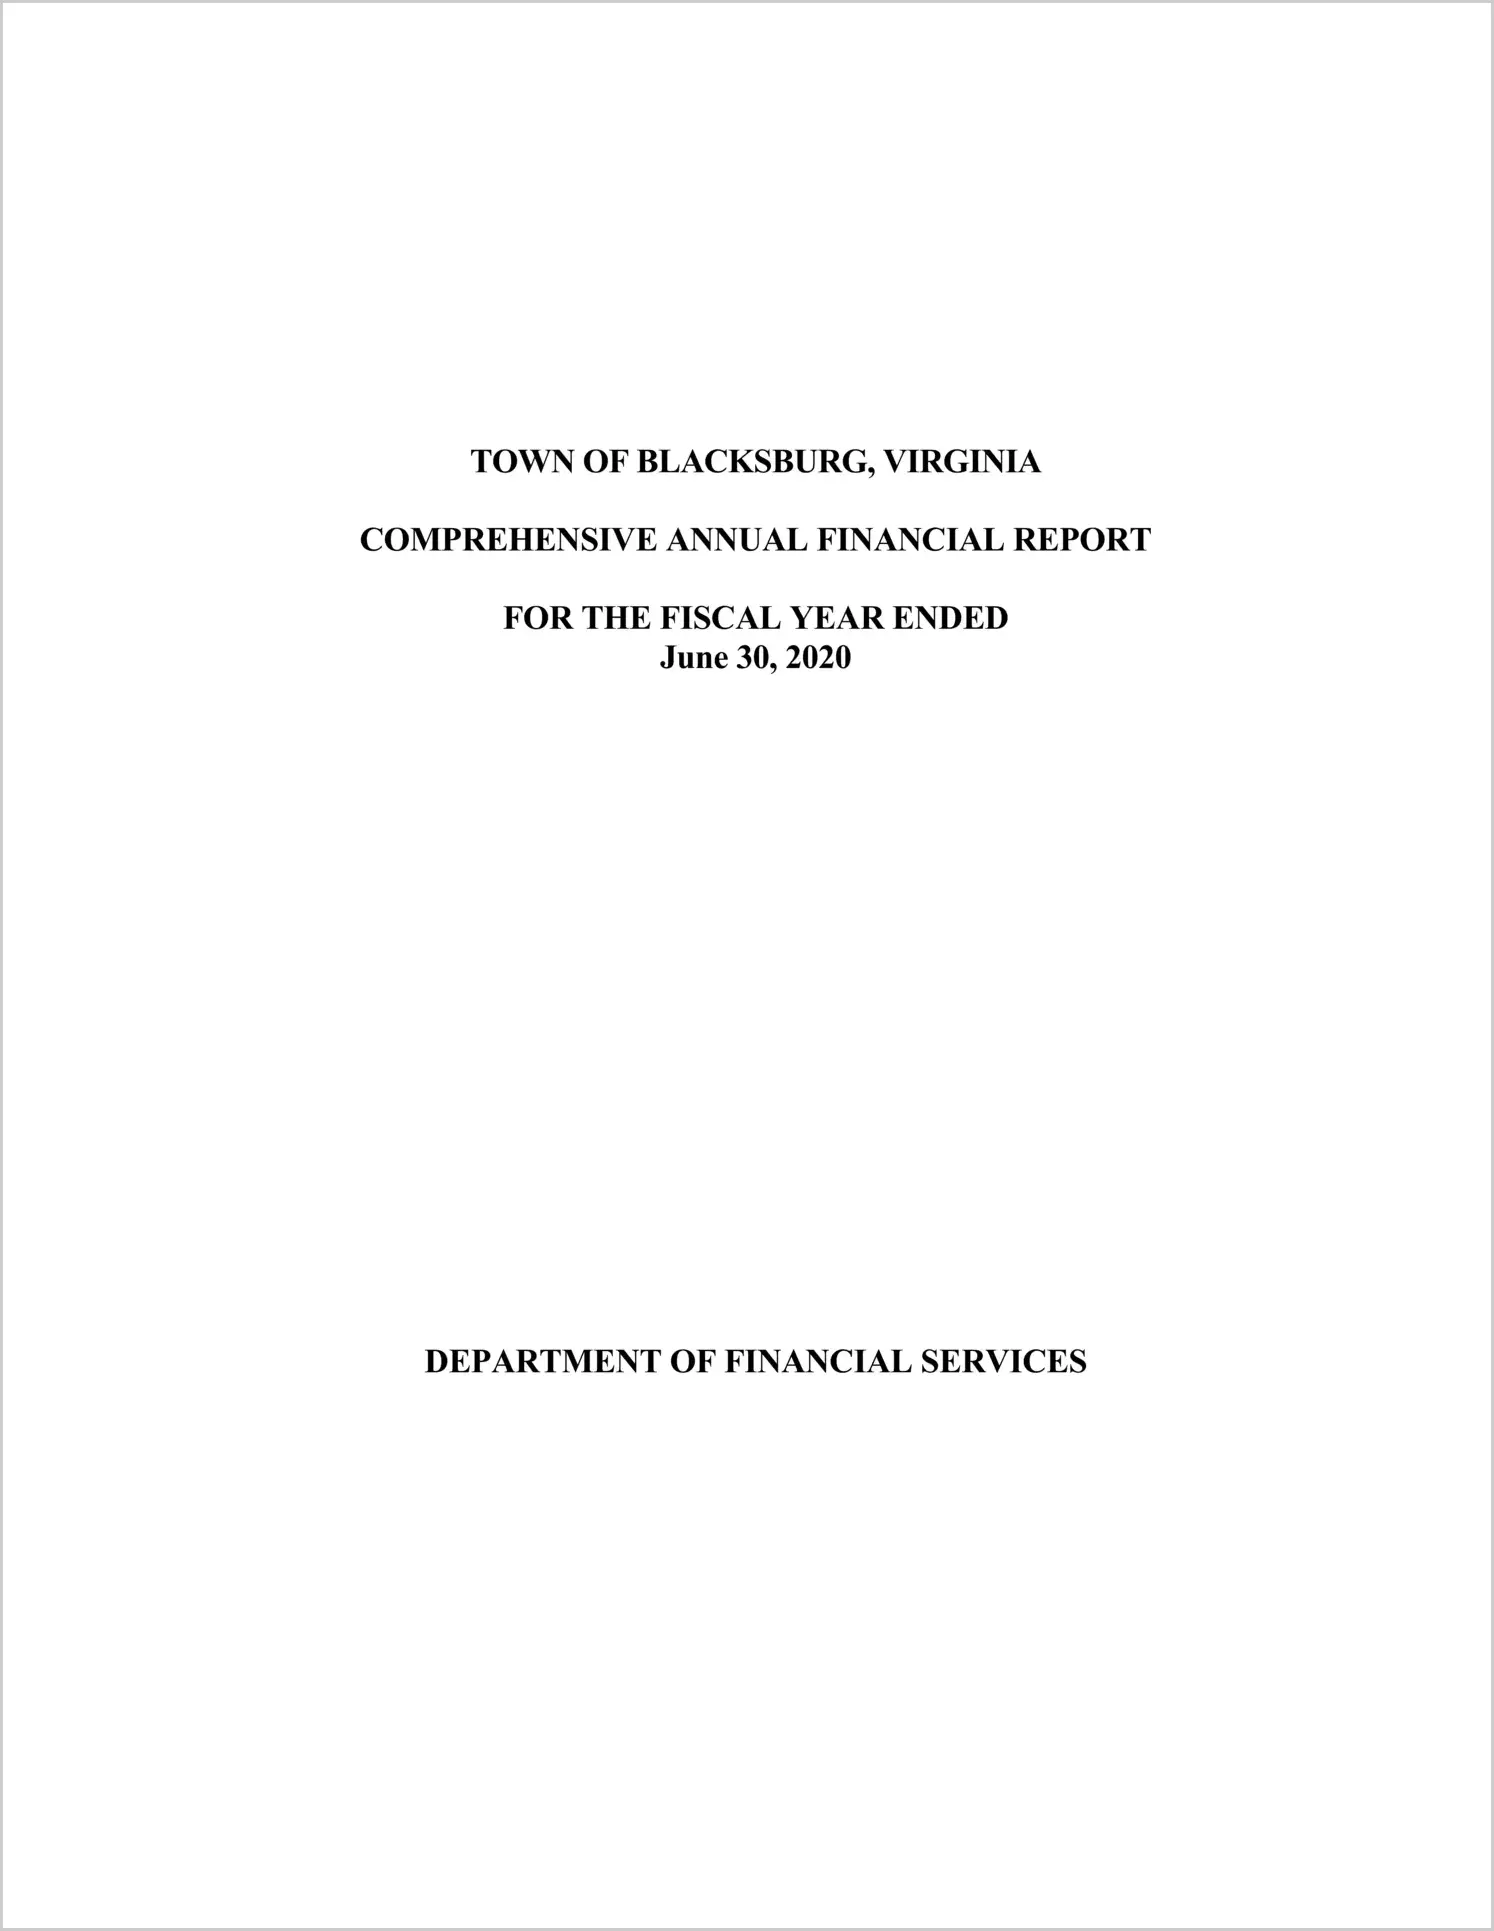 2020 Annual Financial Report for Town of Blacksburg